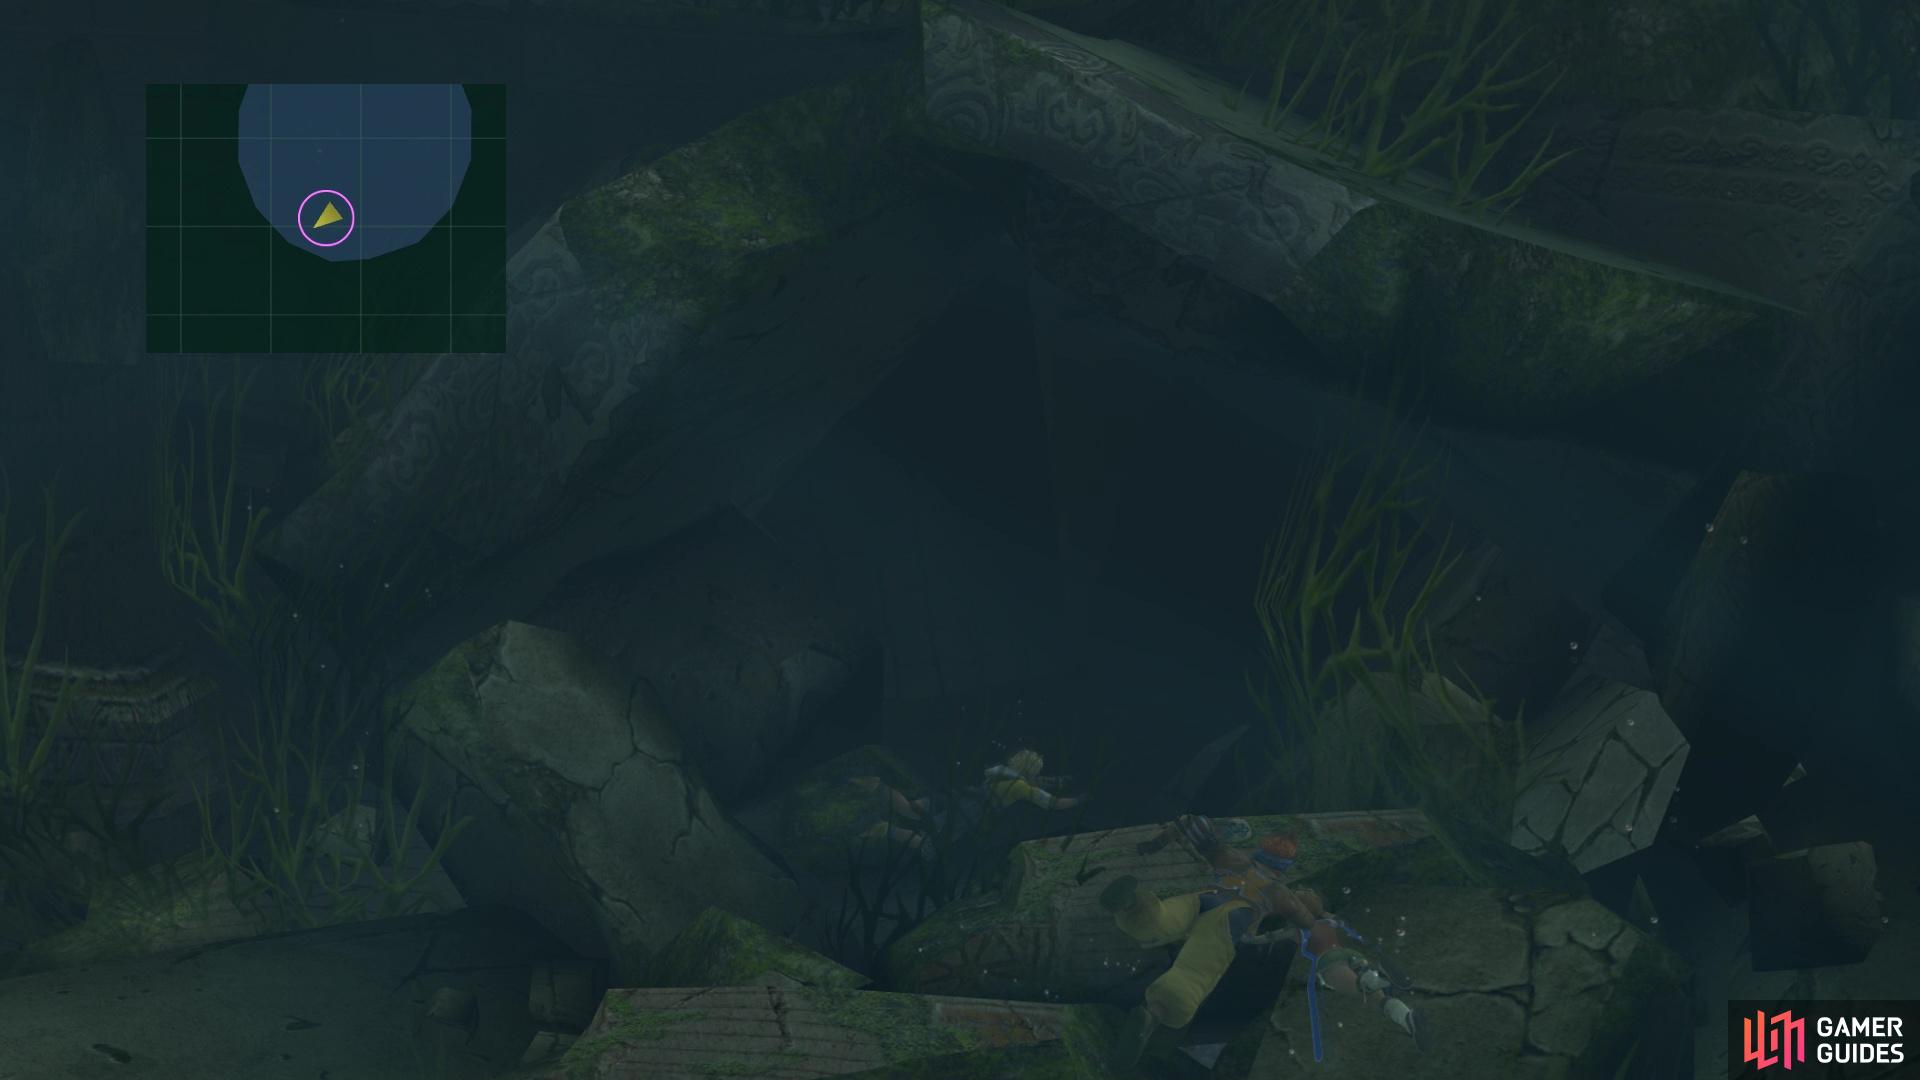 This is the area where you will need to search for the chest